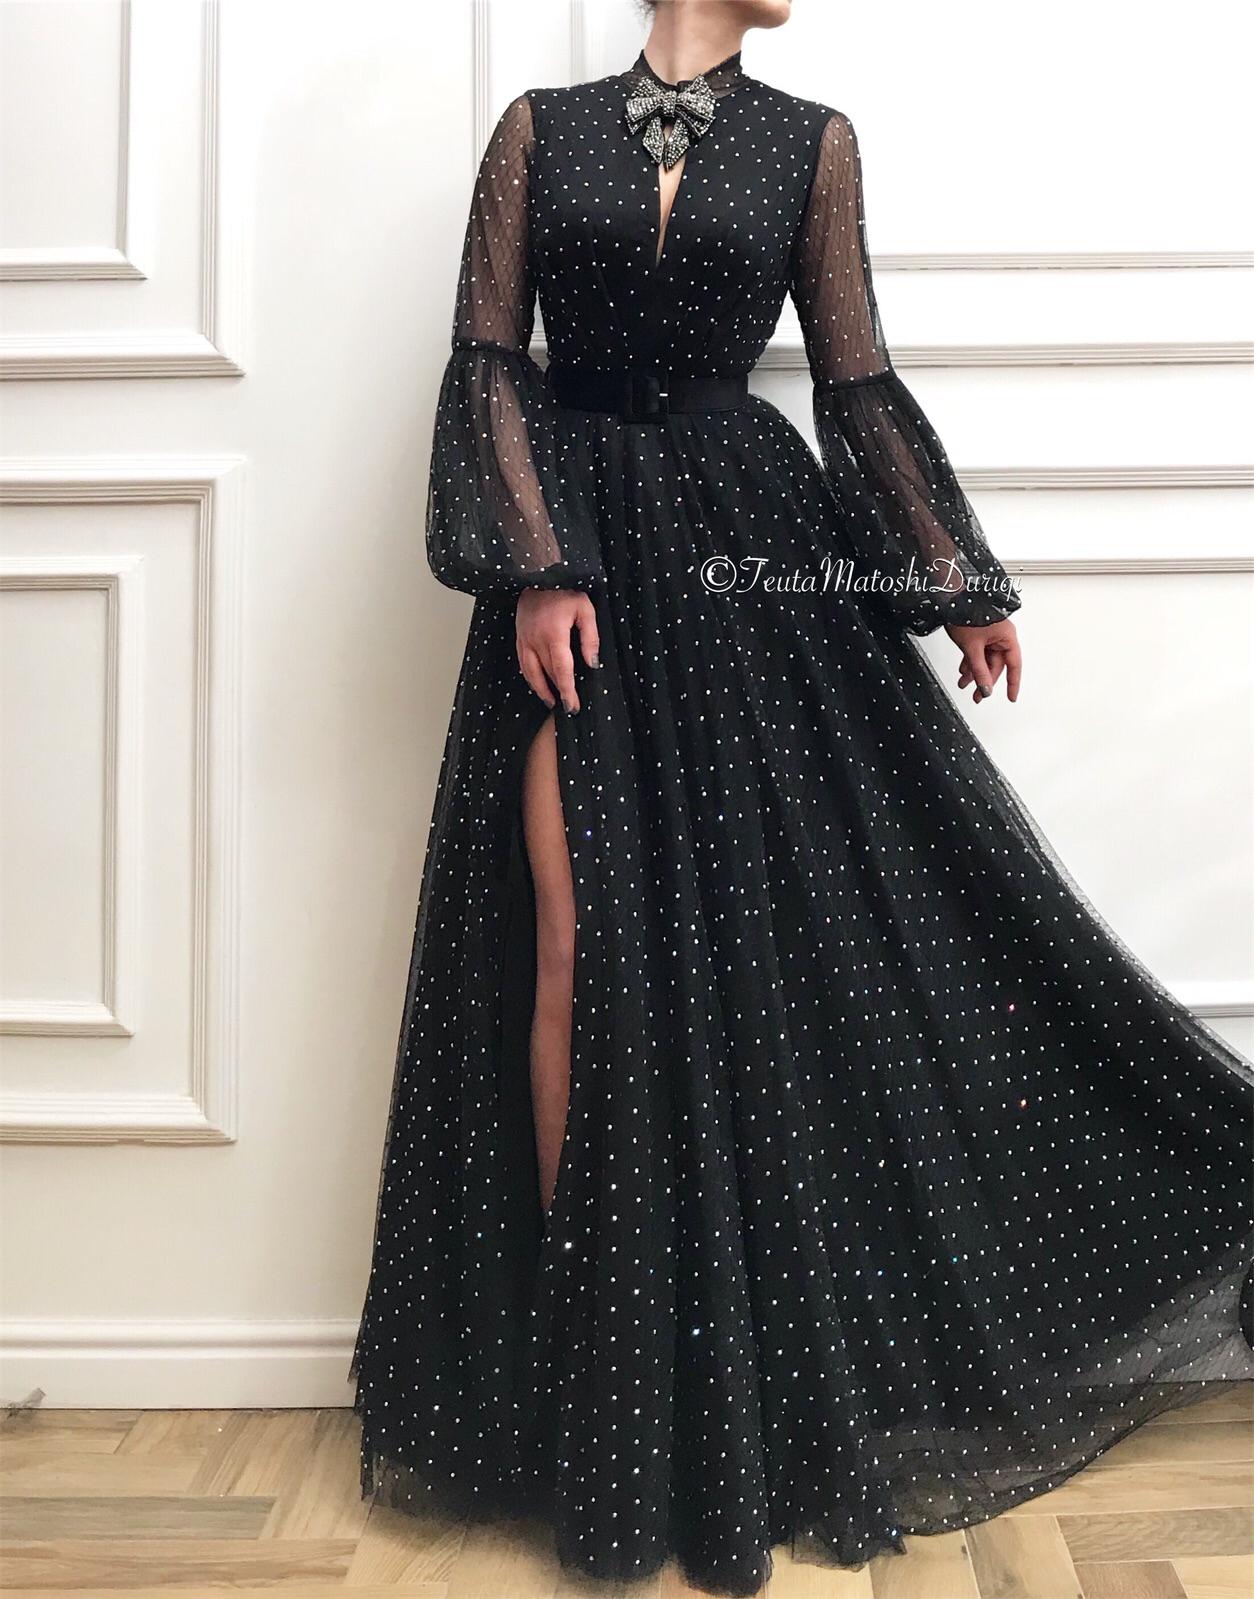 Black A-Line dress with belt, long sleeves, embroidery and dotted fabric